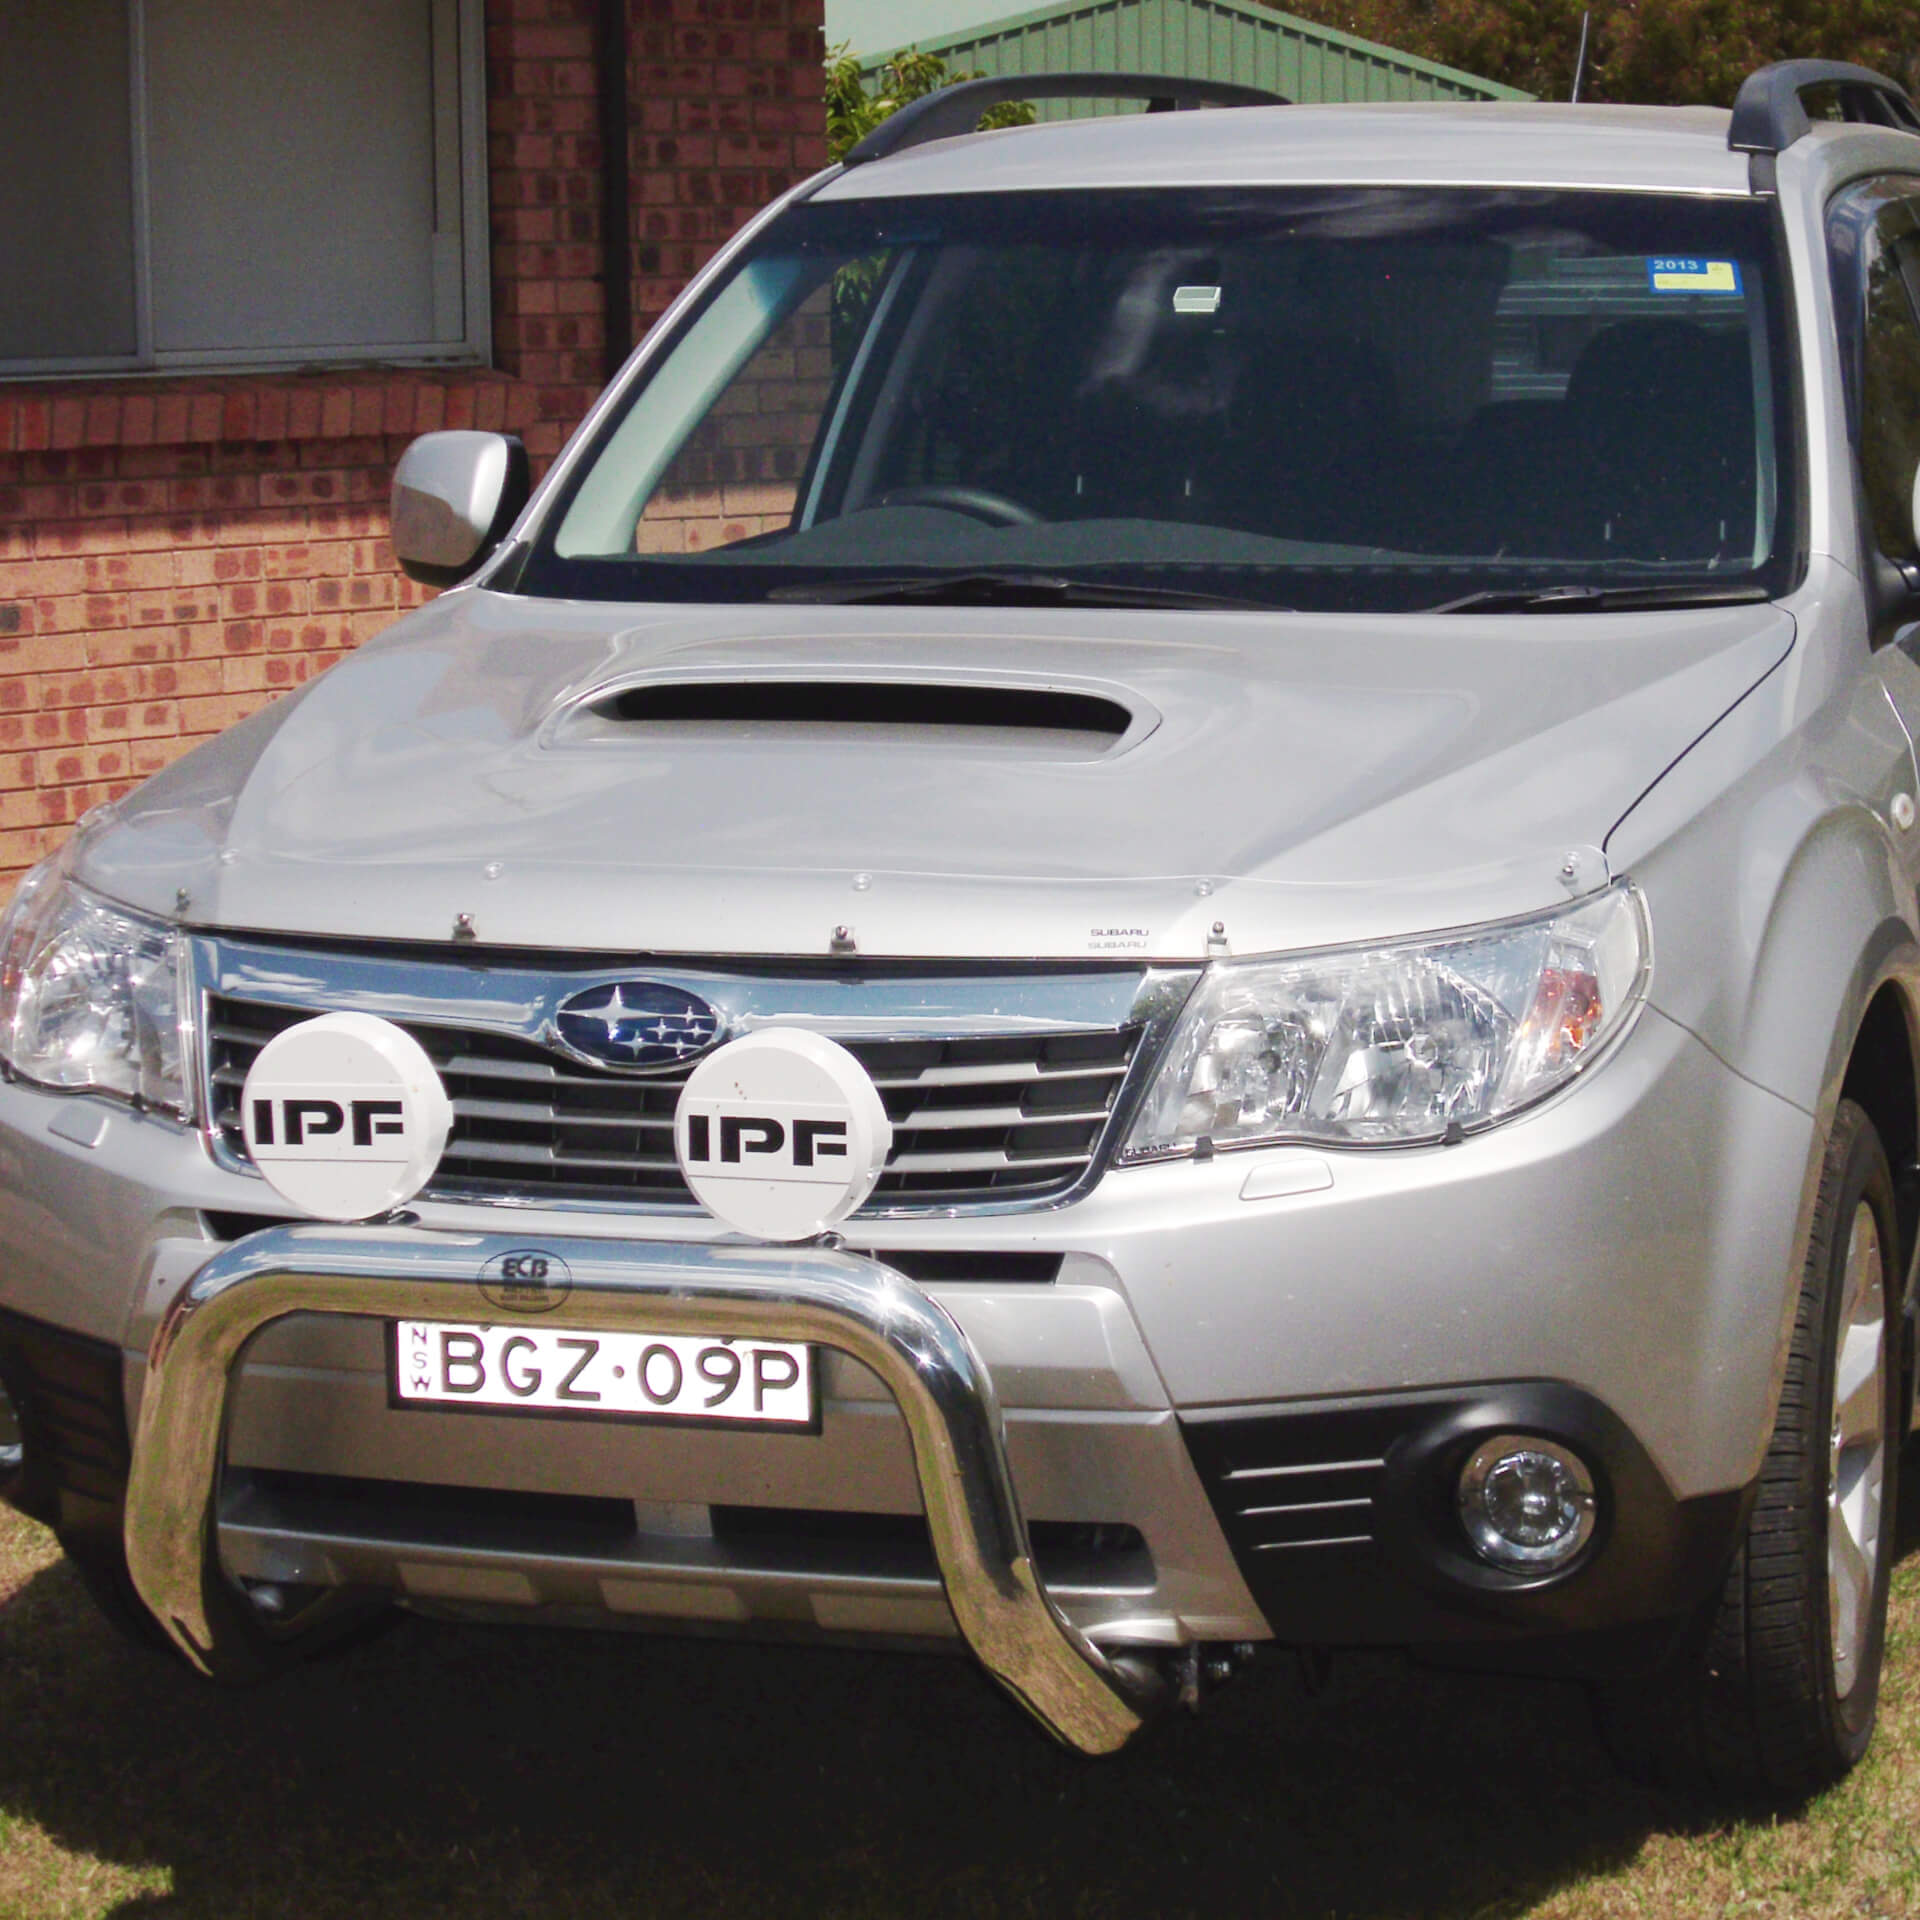 Direct4x4 accessories for Subaru Forester vehicles with a photo of the front of a Subaru Forester on a driveway